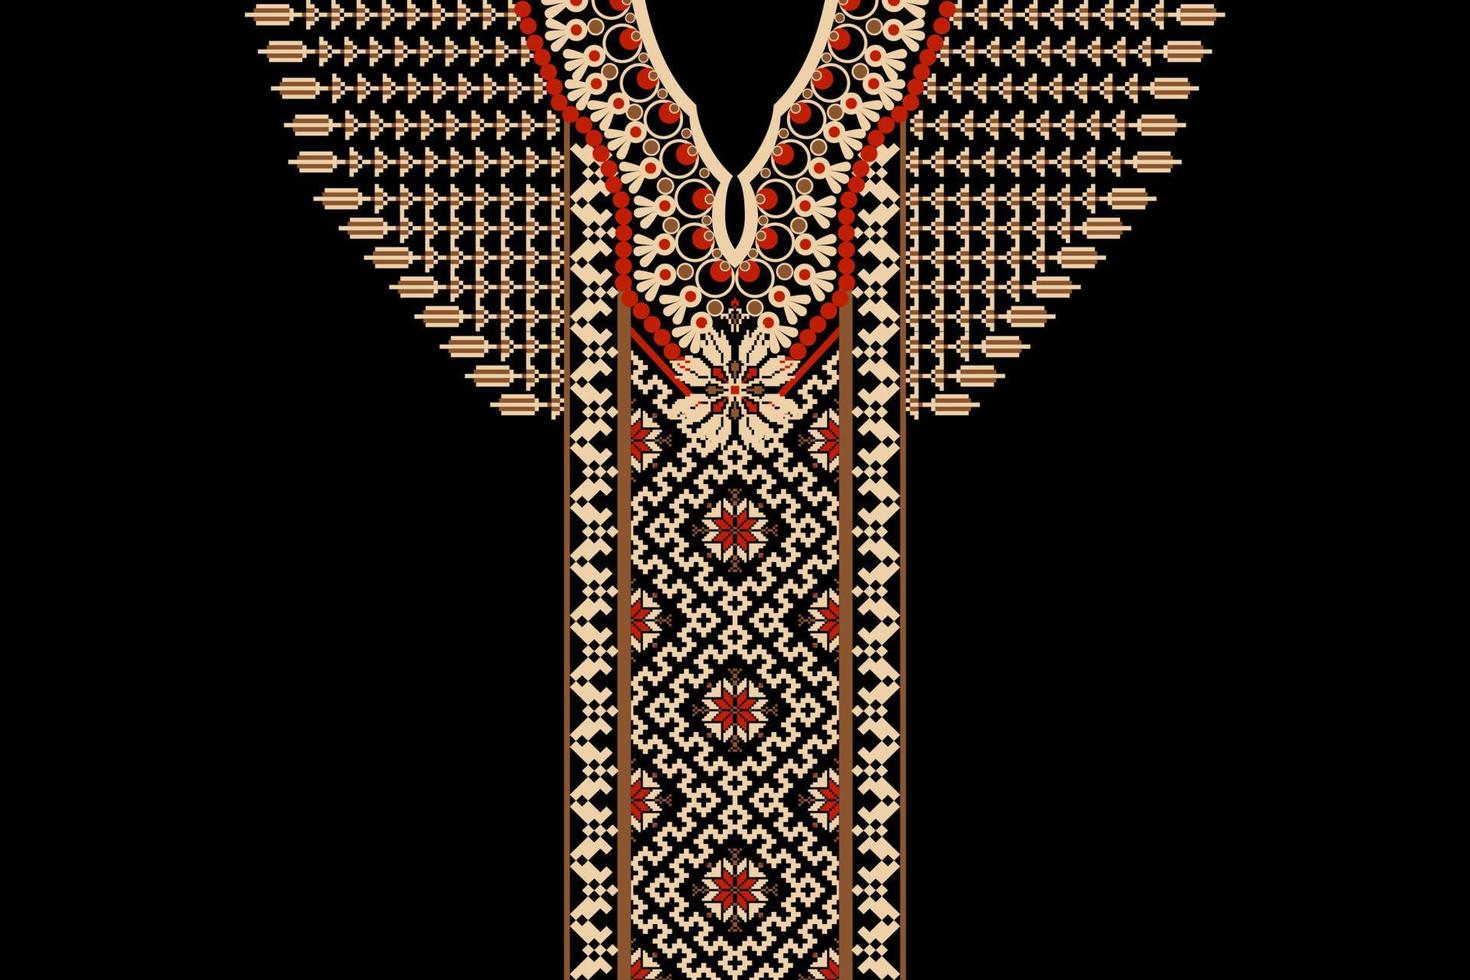 Floral neckline embroidery on black background.geometric ethnic oriental pattern traditional.Aztec style abstract vector.design for texture,fabric,clothing,fashion women wearing,decoration,textile. vector